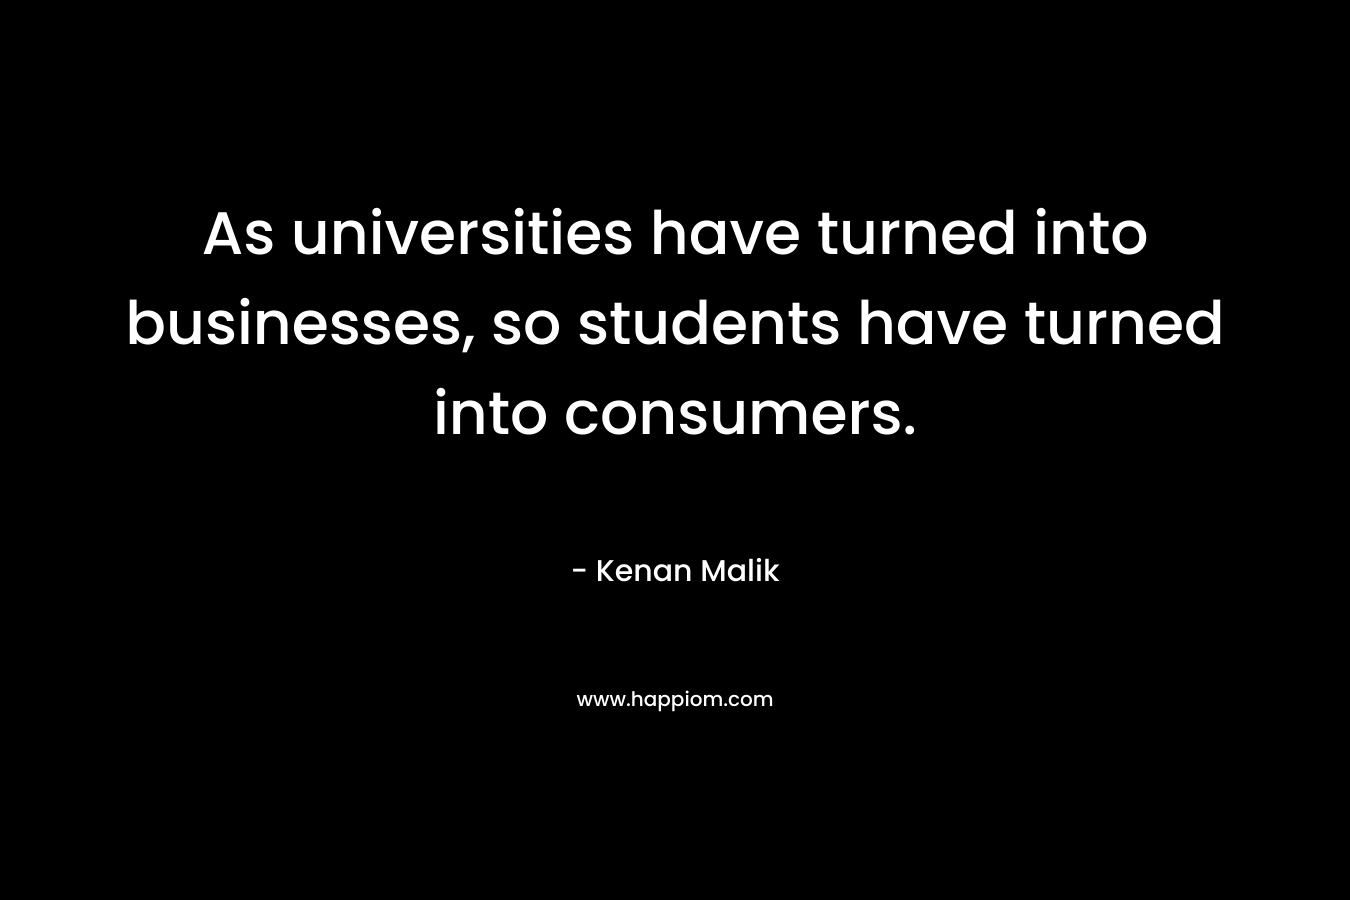 As universities have turned into businesses, so students have turned into consumers.